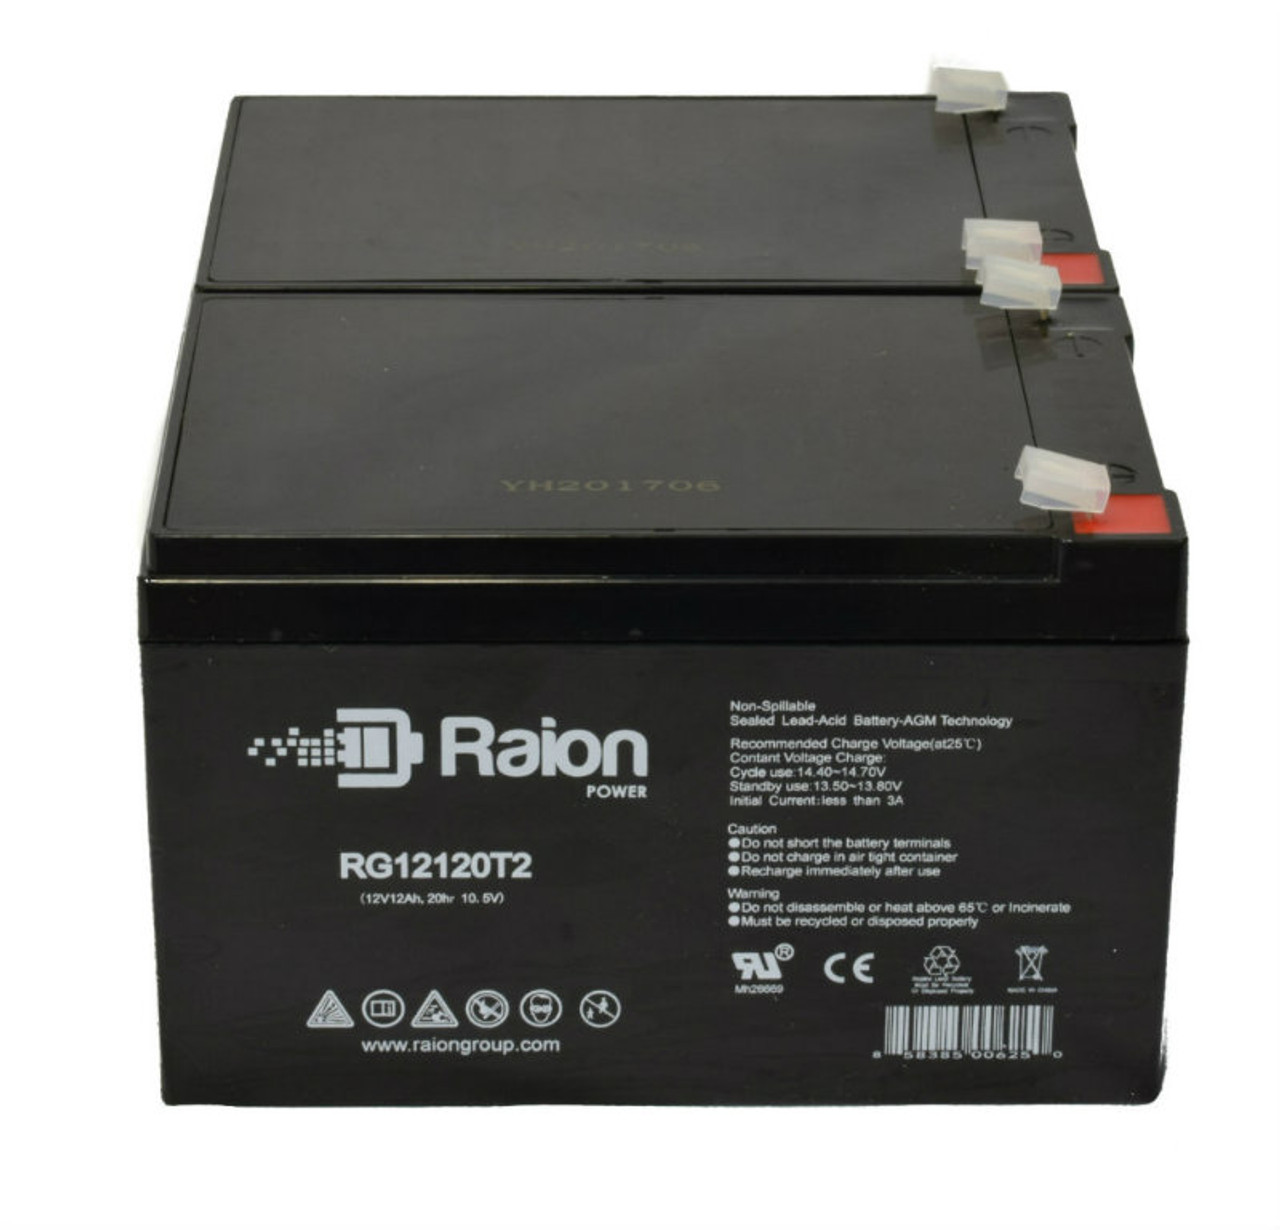 Raion Power RG12120T2 Replacement Battery Set for CTM HS-235 Mobility Scooter - 2 Pack